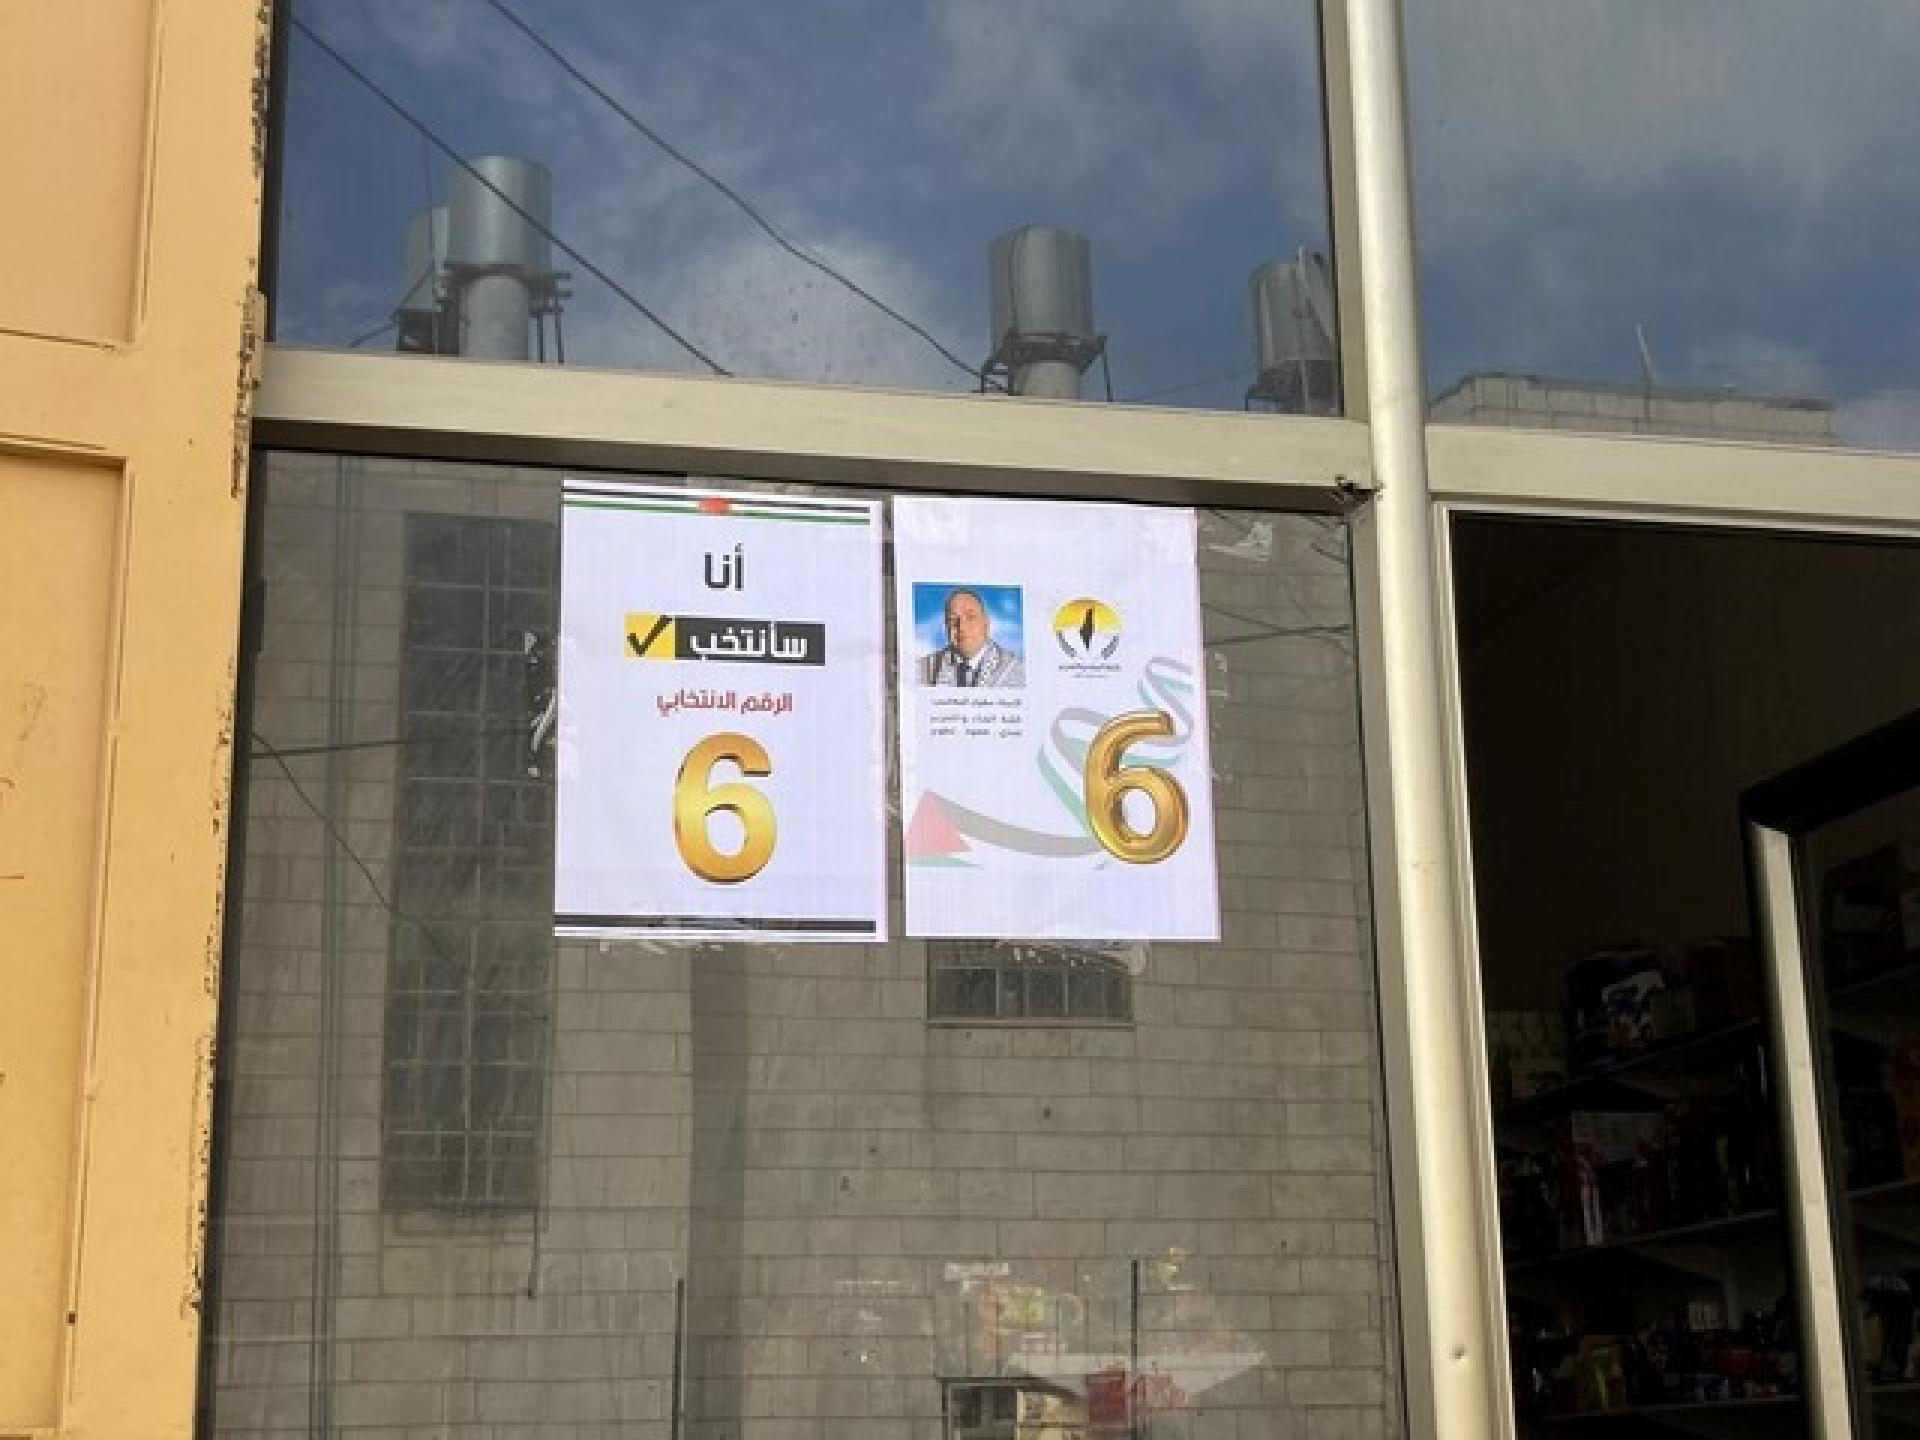 Election signs In Hebron - the candidate of Tel Rumeida